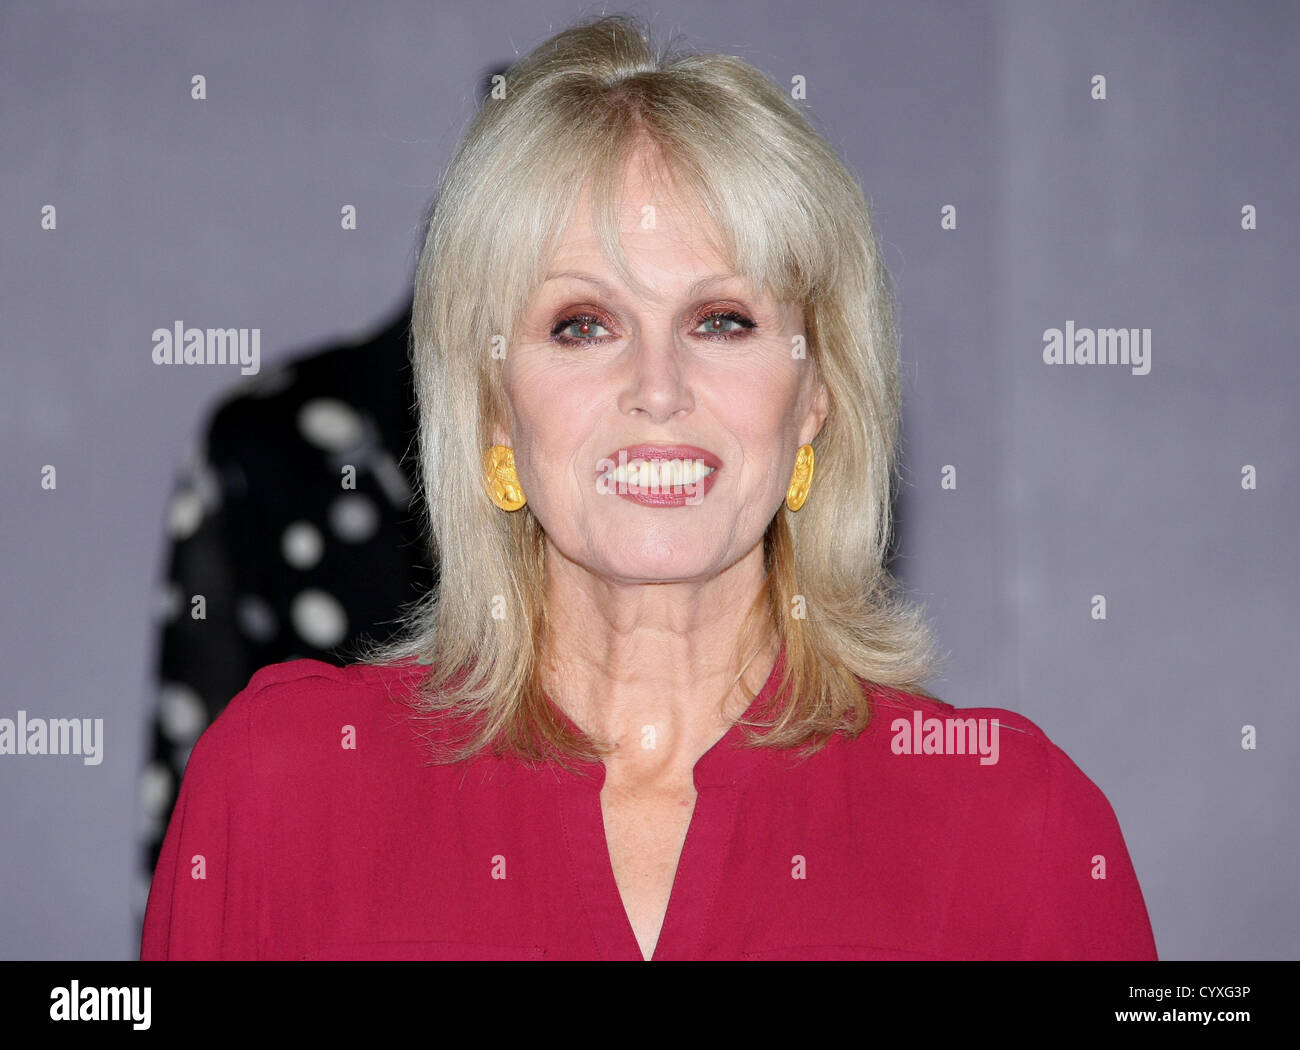 JOANNA LUMLEY Joanna Lumley Absolutely Fabulous L'AUCTION LONDON ENGLAND UK 12 Novembre 2012 Banque D'Images